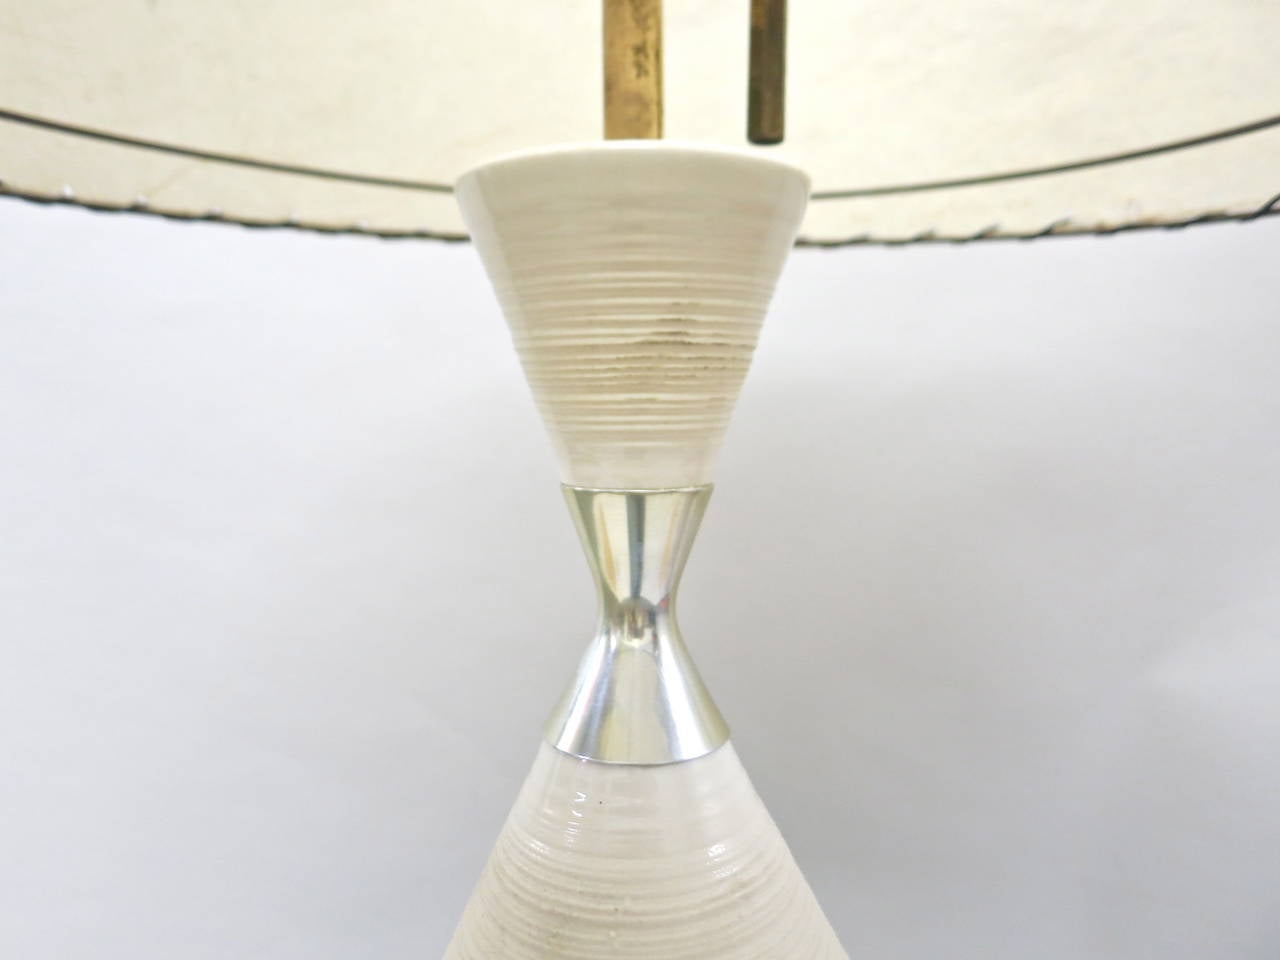 Mid-Century Modern Table Lamp by Gerald Thurston for Lightolier, Made in USA,  circa 1950